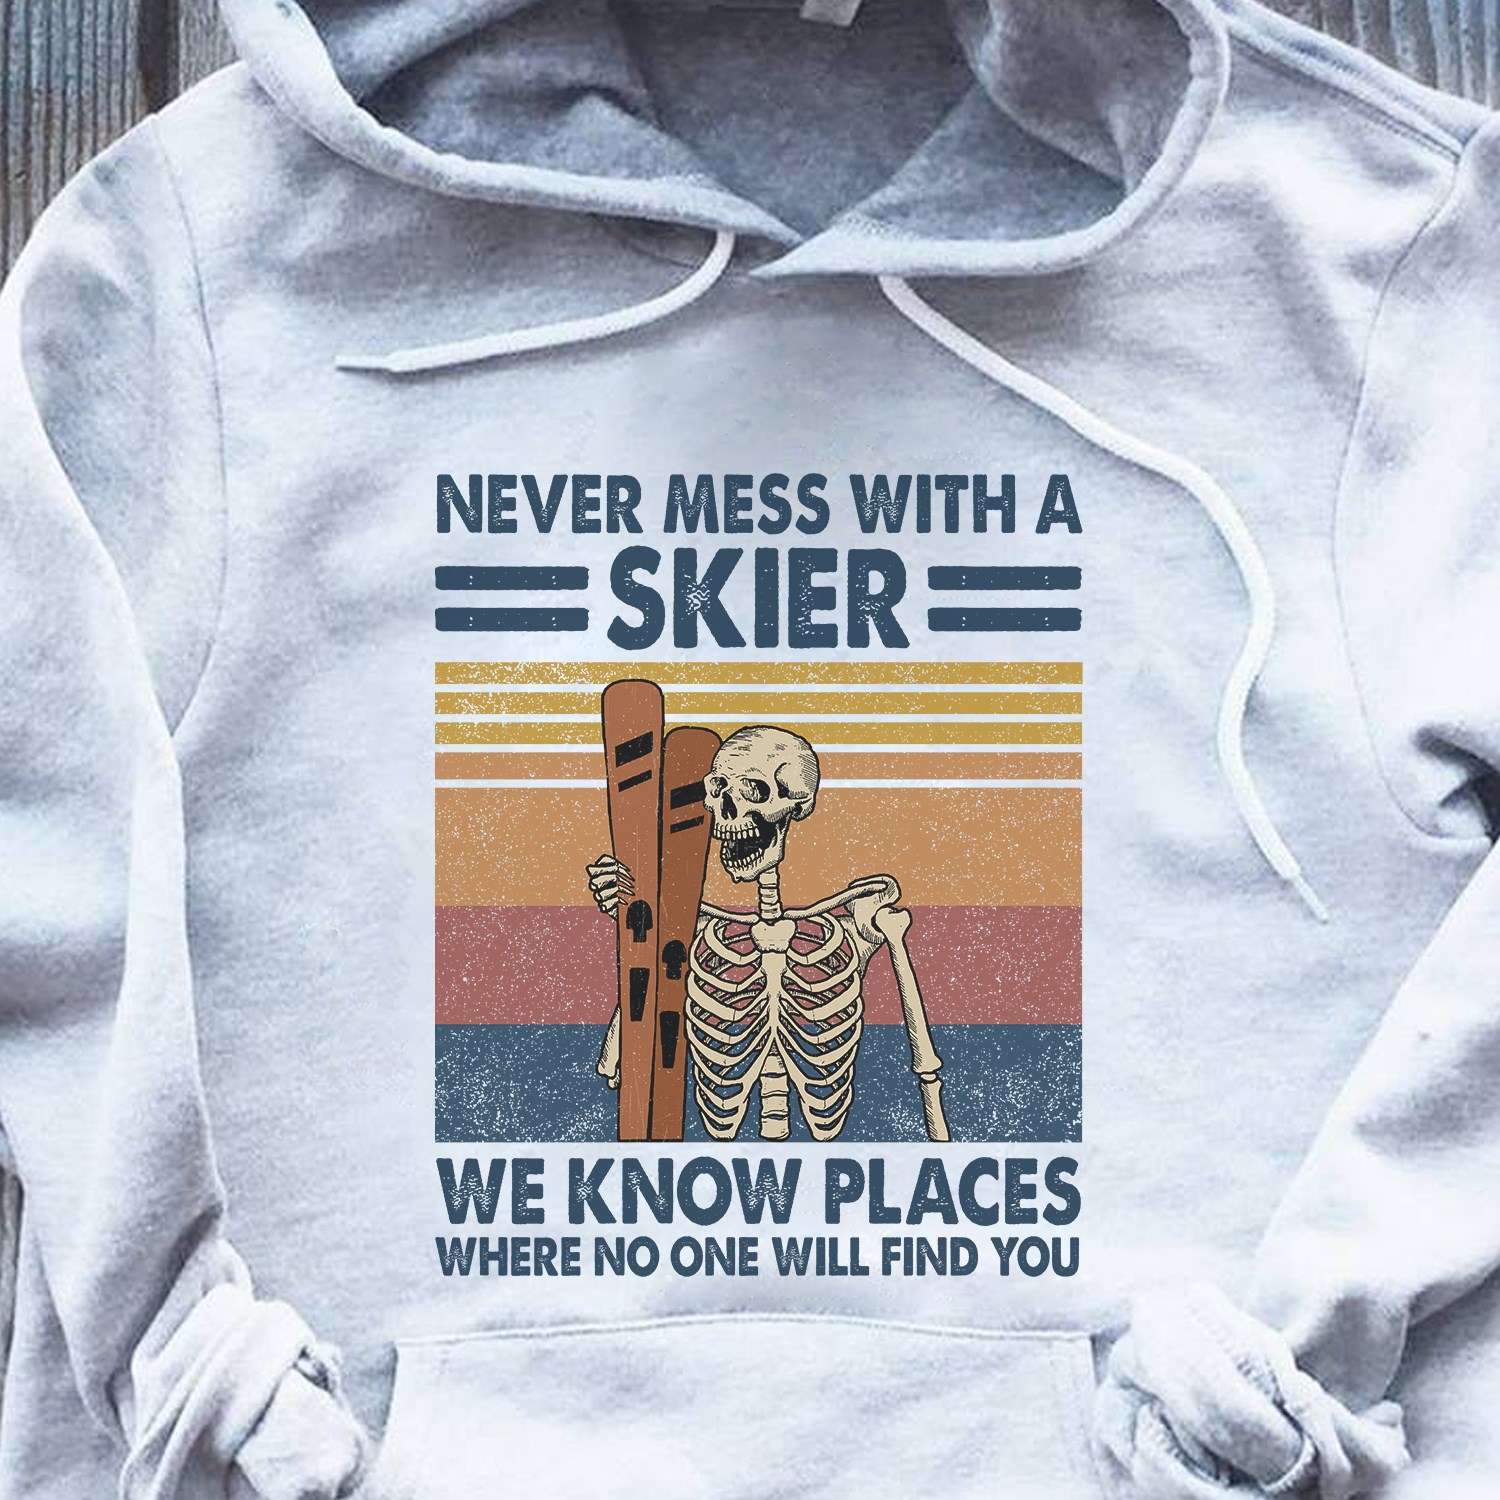 Never mess with a skier, we know places where no one will find you - Skull go skiing